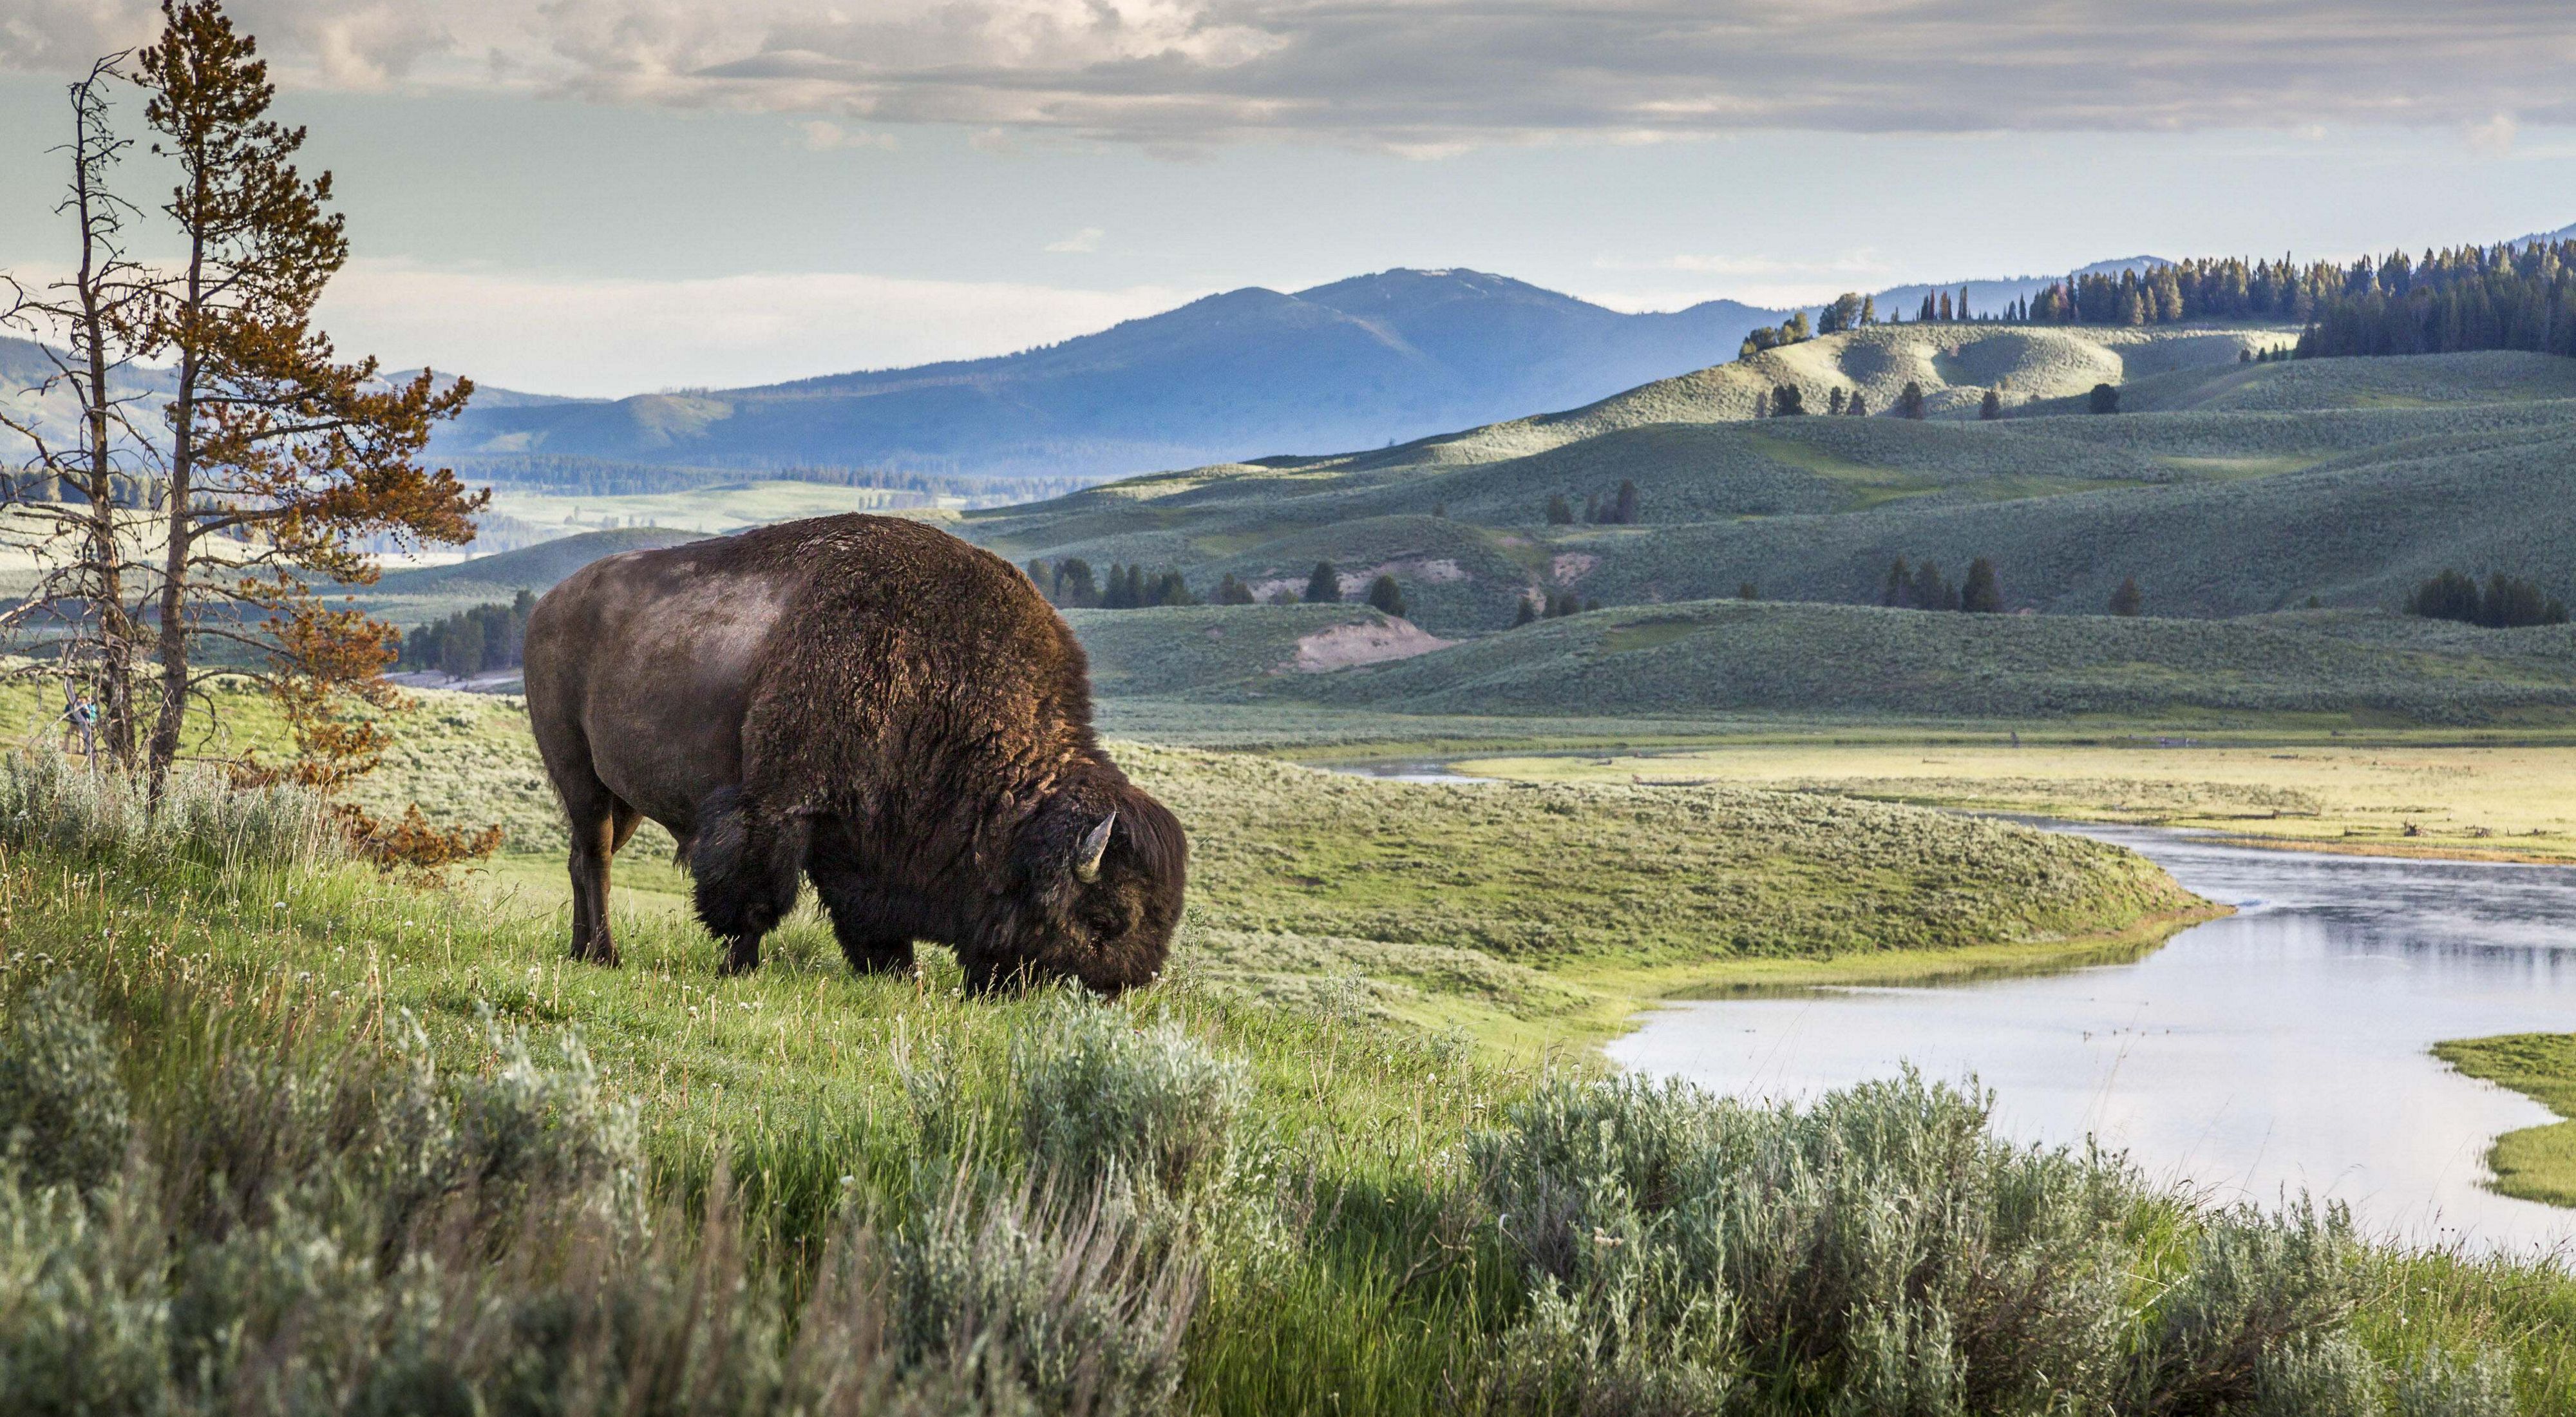 A bison at Yellowstone National Park.